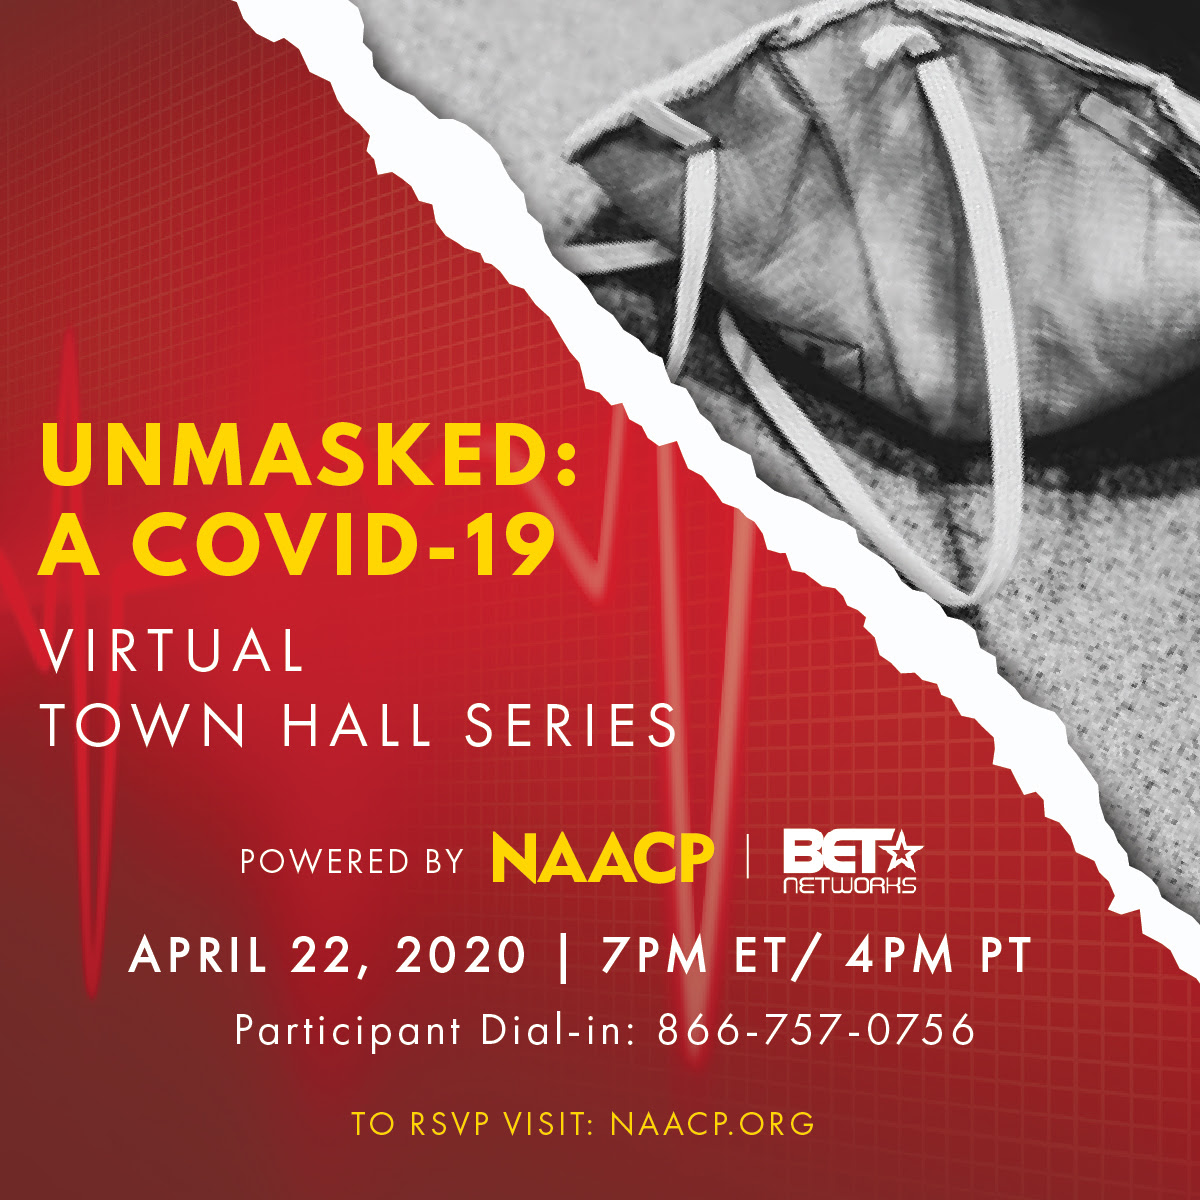 Unmasked: A COVID-19 Virtual Town Hall Series Part 3 - RSVP at naacp.org